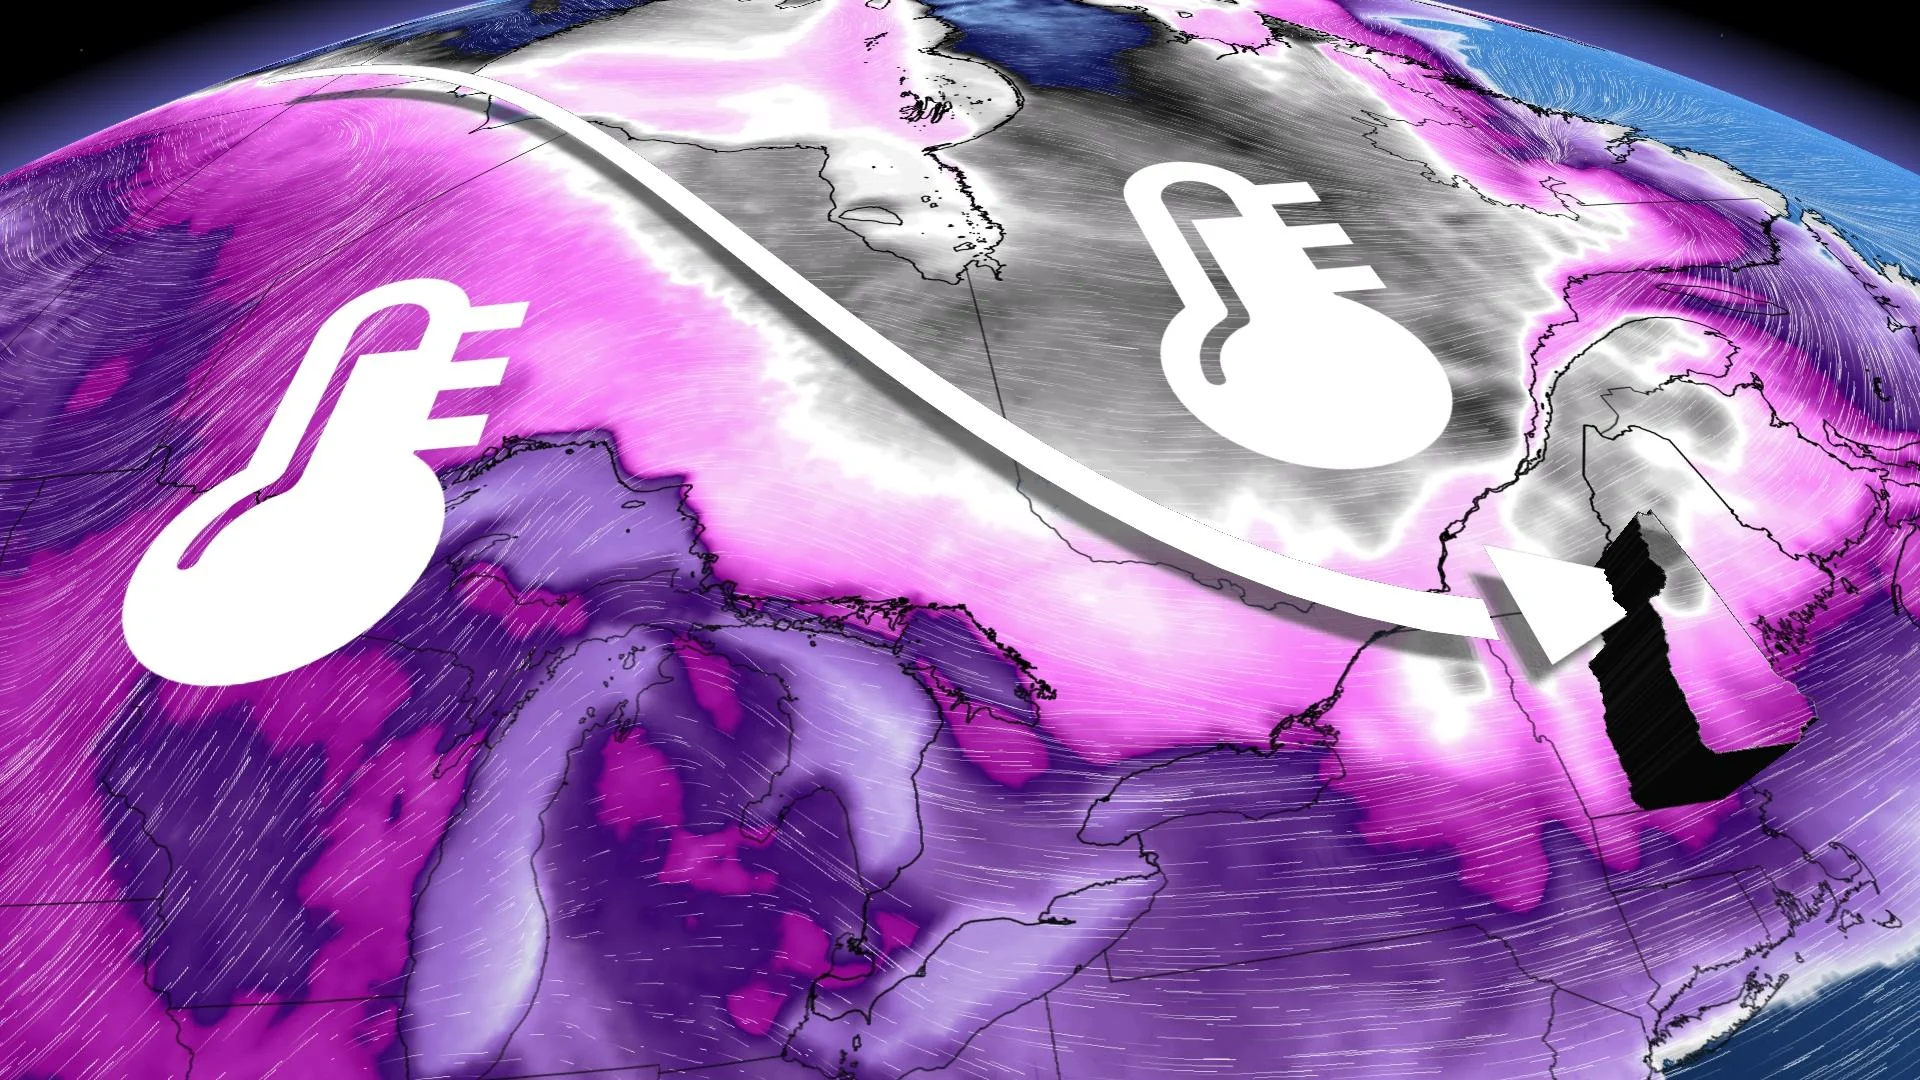 Day After Tomorrow wind chill felt in North America, record smashed